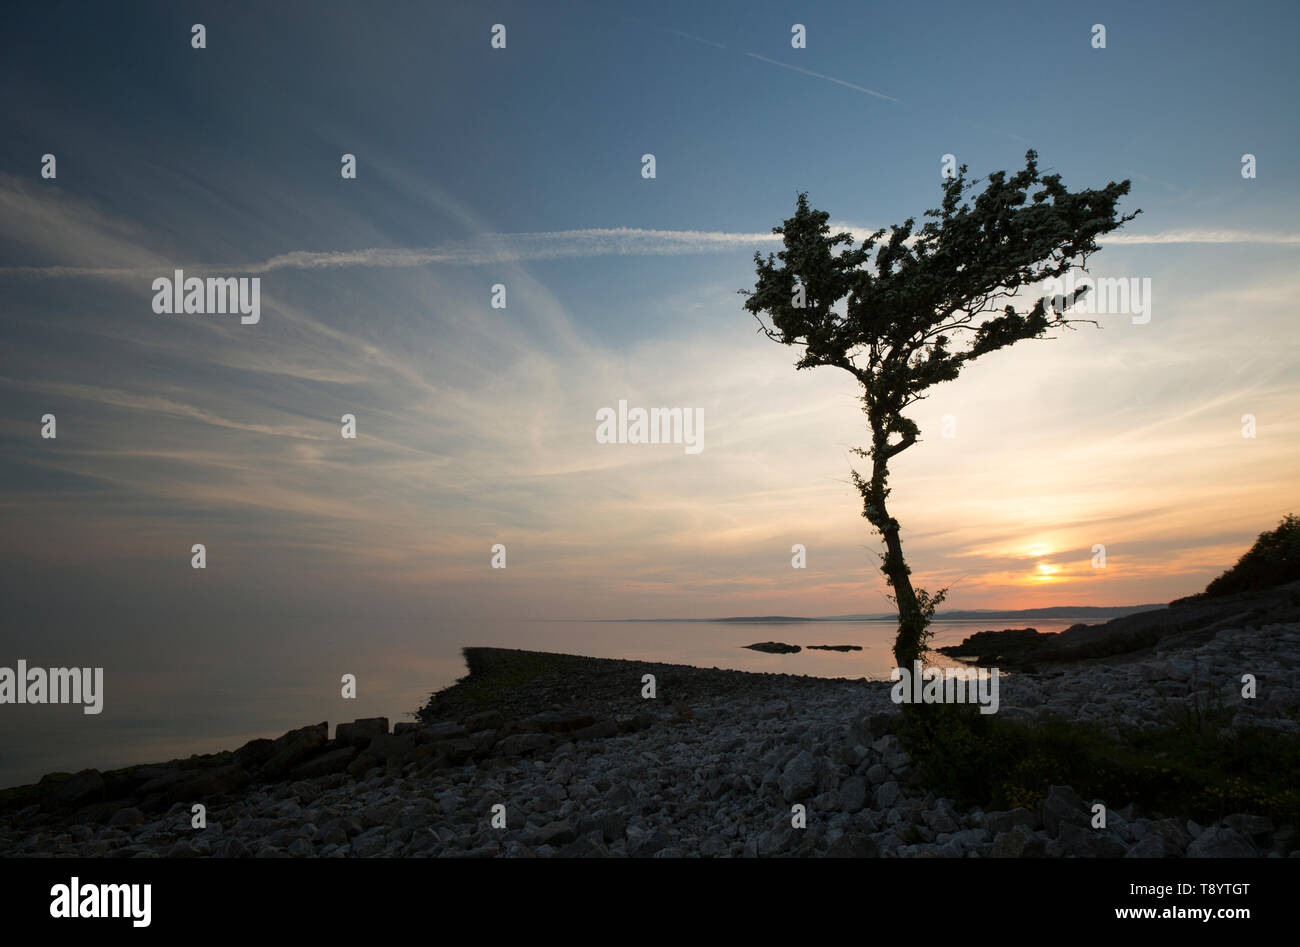 A single, flowering hawthorn tree, Crataegus monogyna, at sunset growing at Jenny Brown’s Point near the village of Silverdale on the edge of the estu Stock Photo